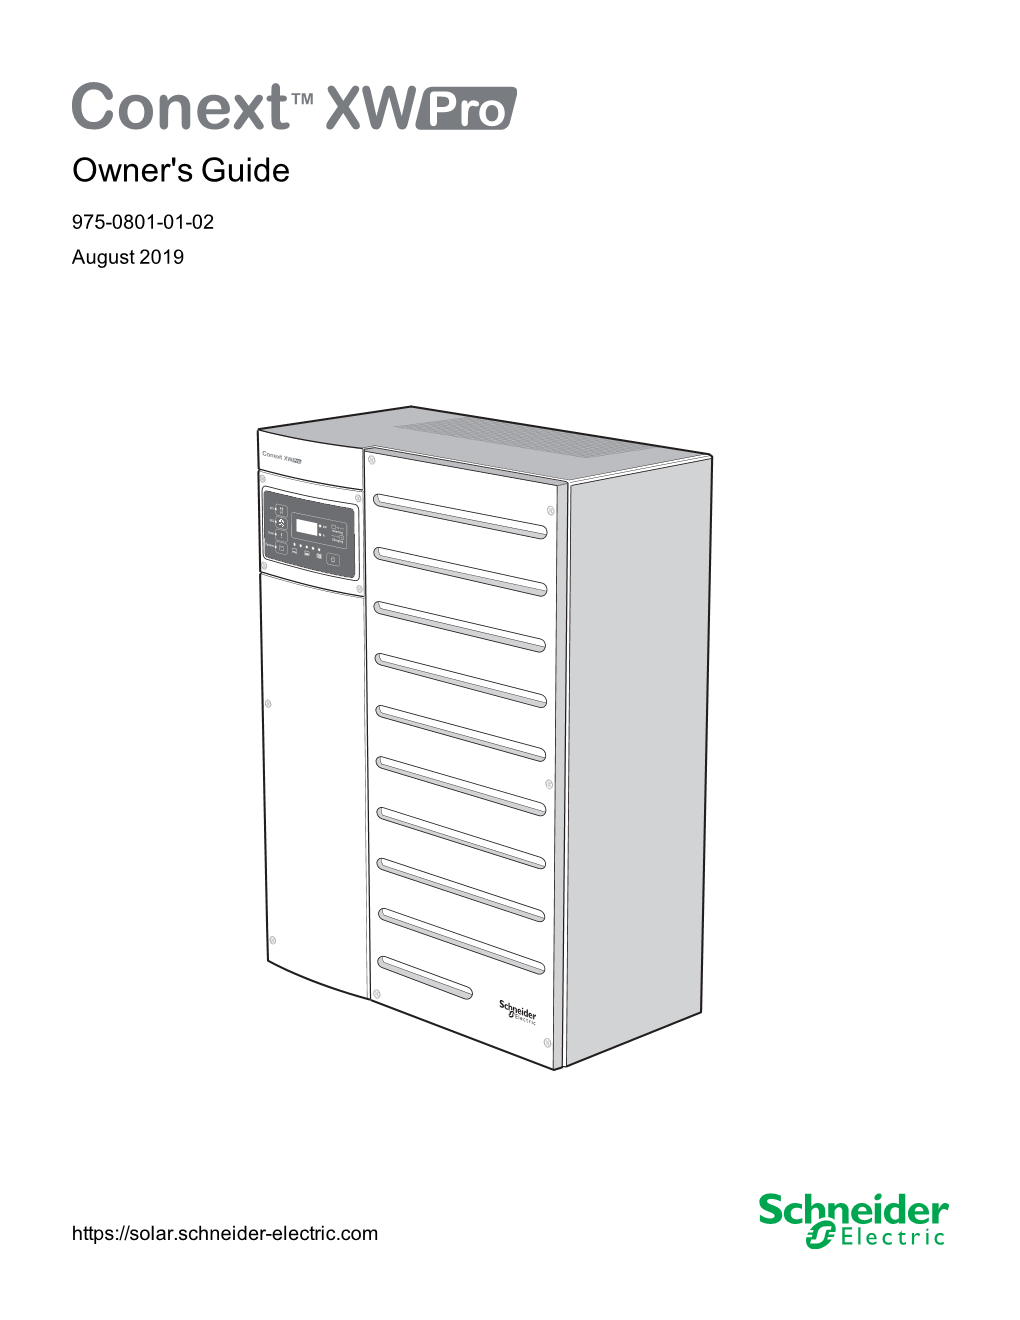 Conext XW Pro NA Owner's Guide (975-0801-01-01 Rev-A)